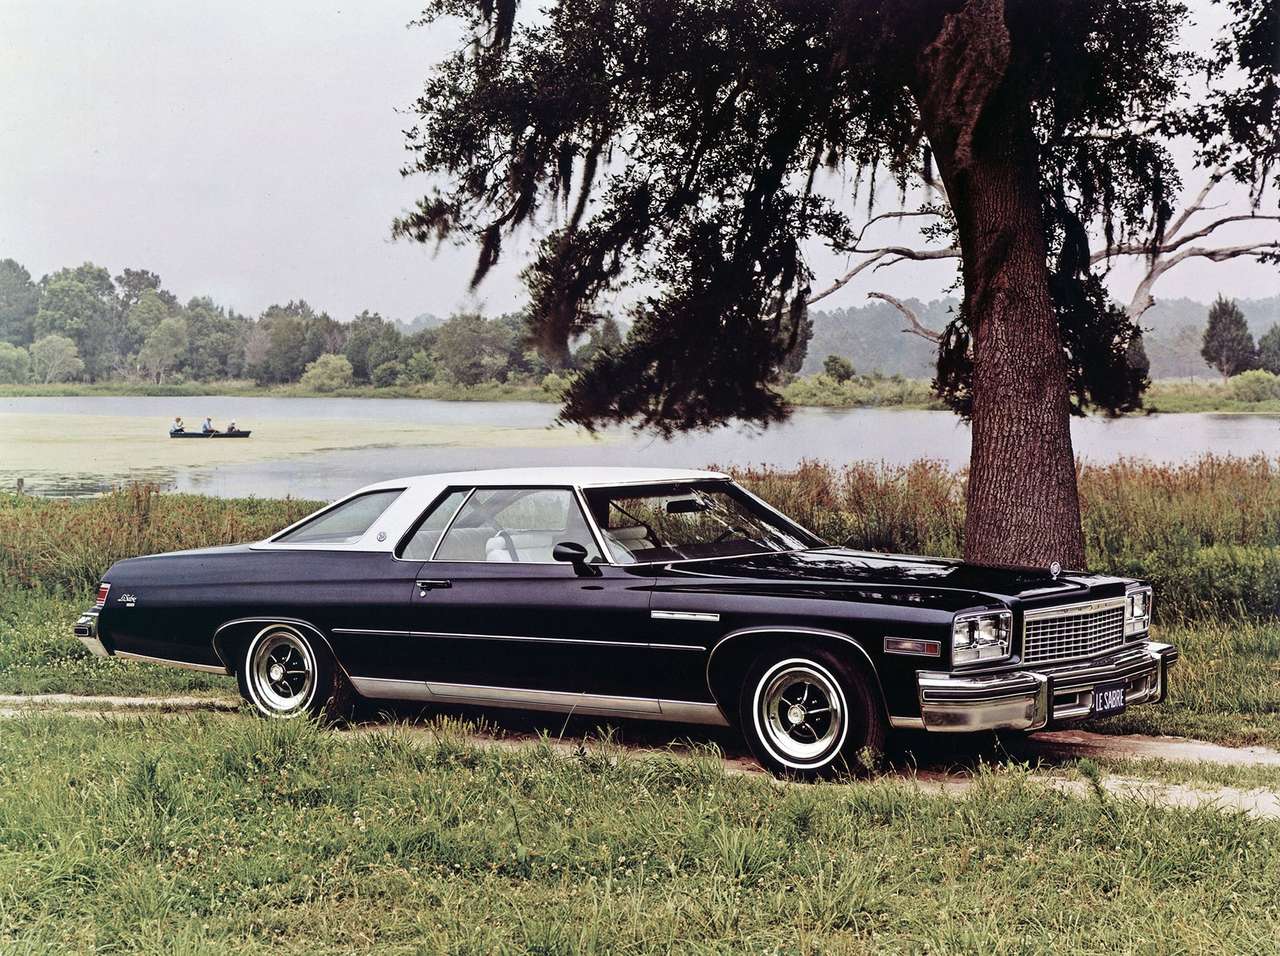 1976 Buick LeSabre Custom Hardtop Coupe jigsaw puzzle online